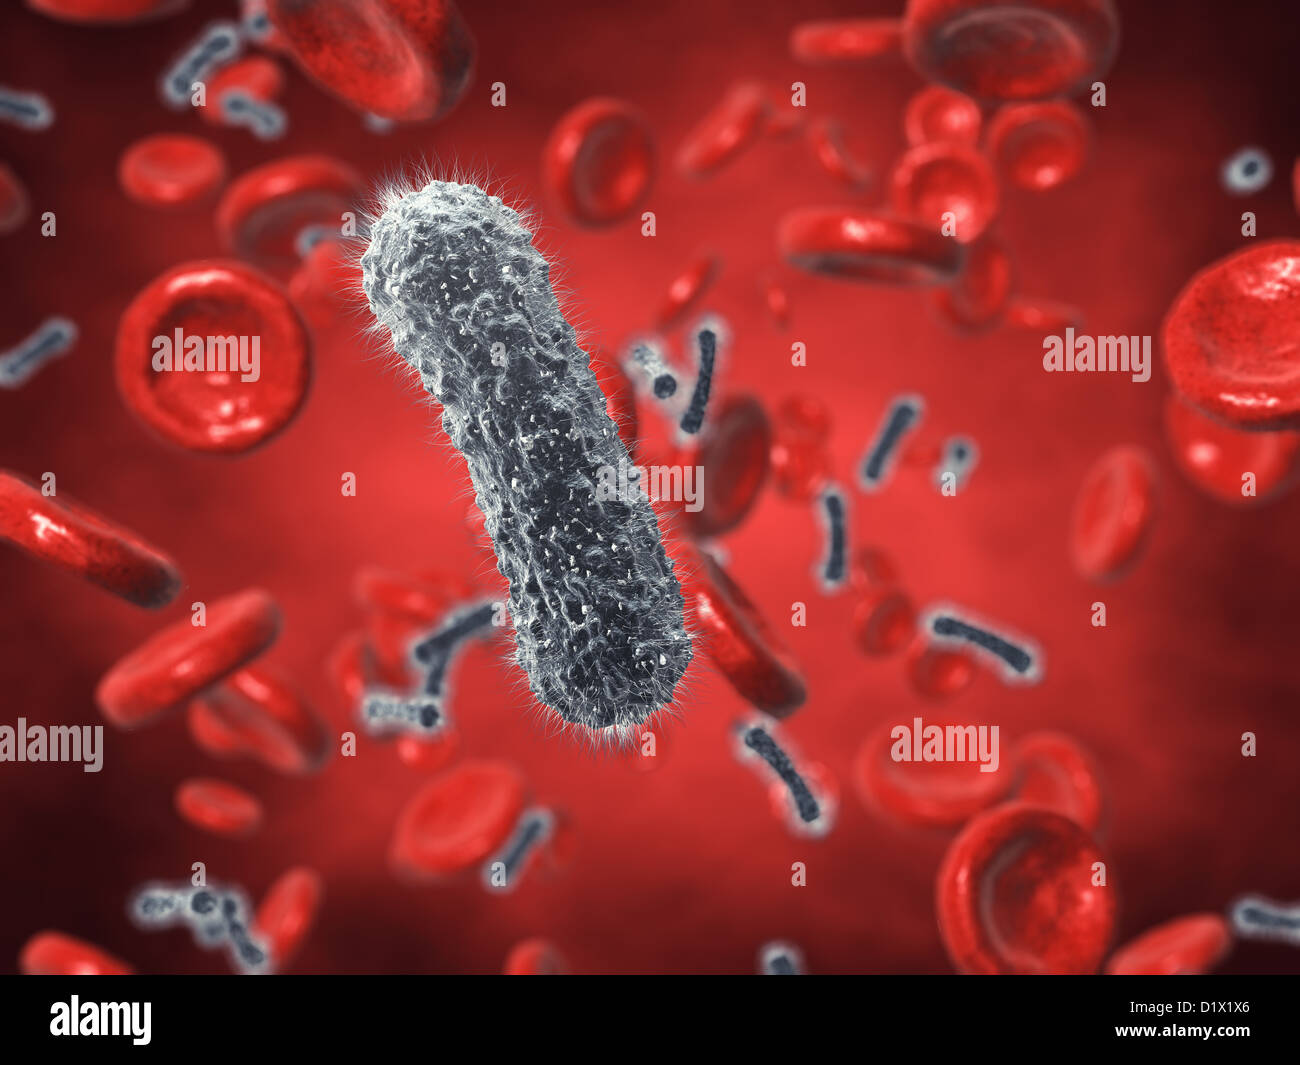 Bacteria and red blood cells , contaminated blood Stock Photo